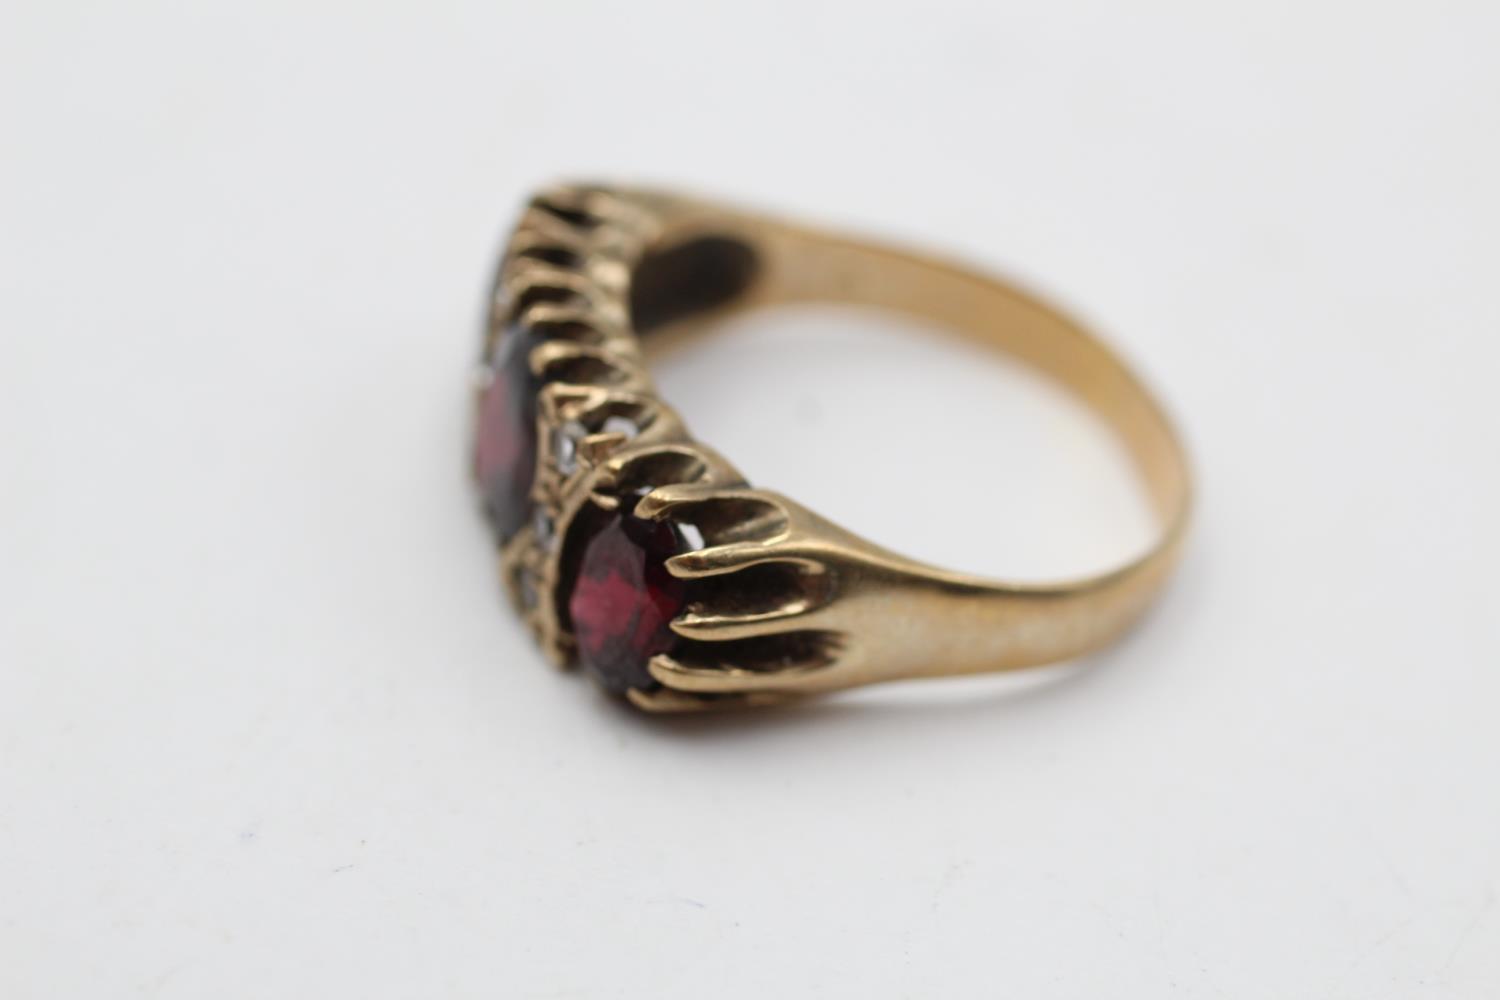 9ct gold vintage garnet & clear gemstone buttercup setting dress ring (4.6g) Size Q - Image 2 of 5